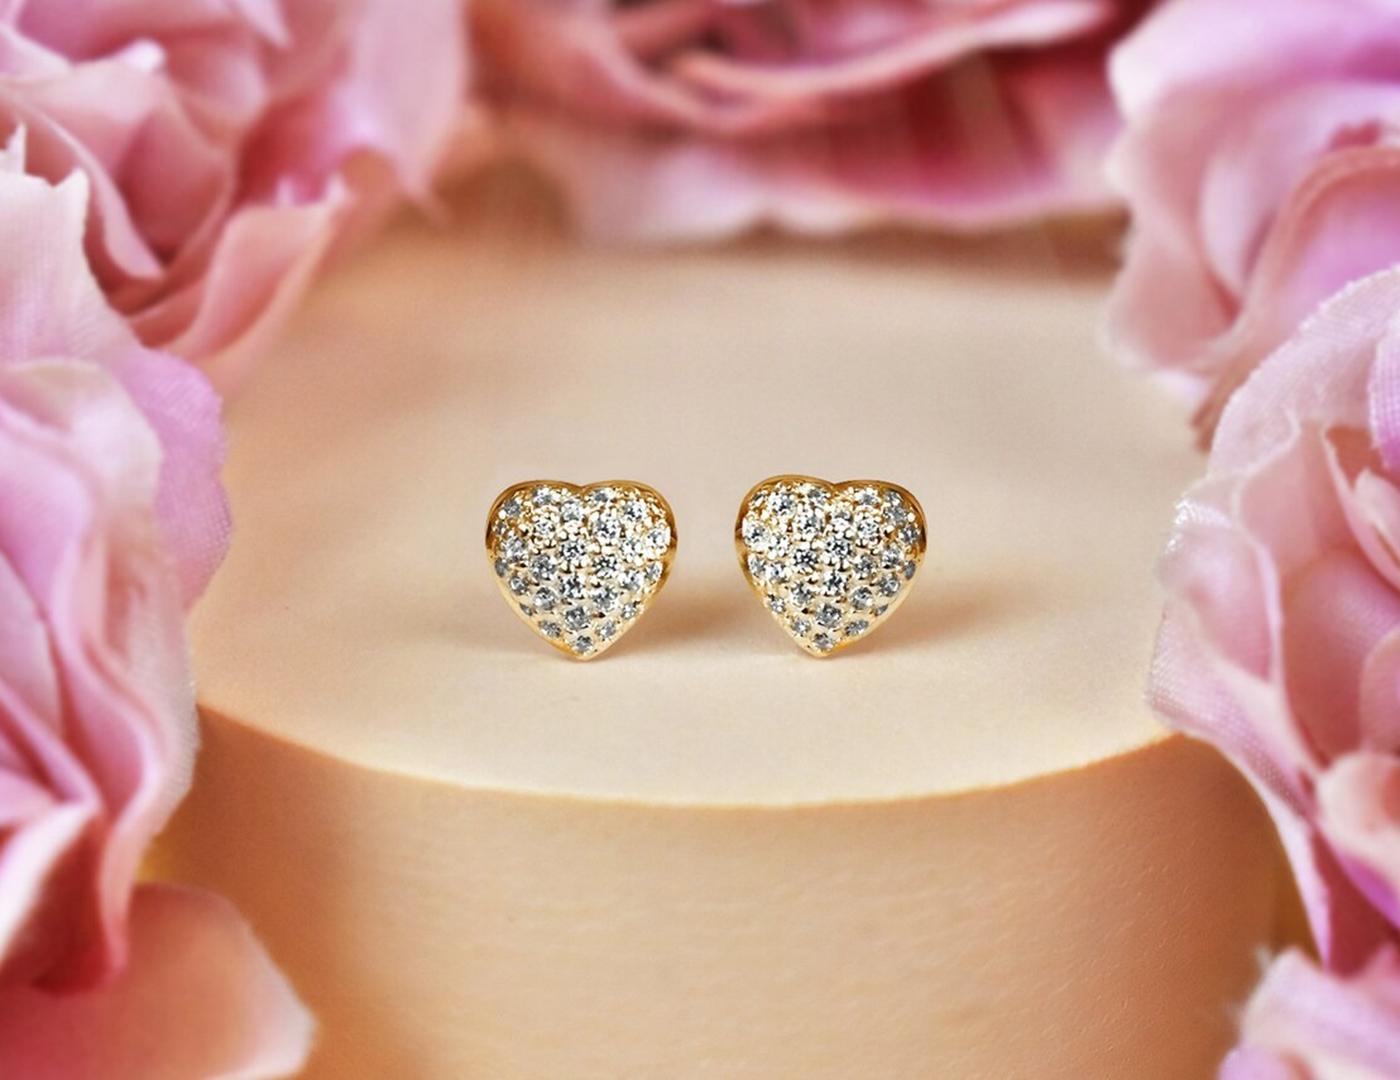 Heart Shaped Diamond Earrings in 14k Rose Gold, Yellow Gold, White Gold.

These Dainty Stud Earrings are made of 14k solid gold featuring shiny brilliant round cut natural diamonds set by master setter in our studio. Simple but unique, elegant and